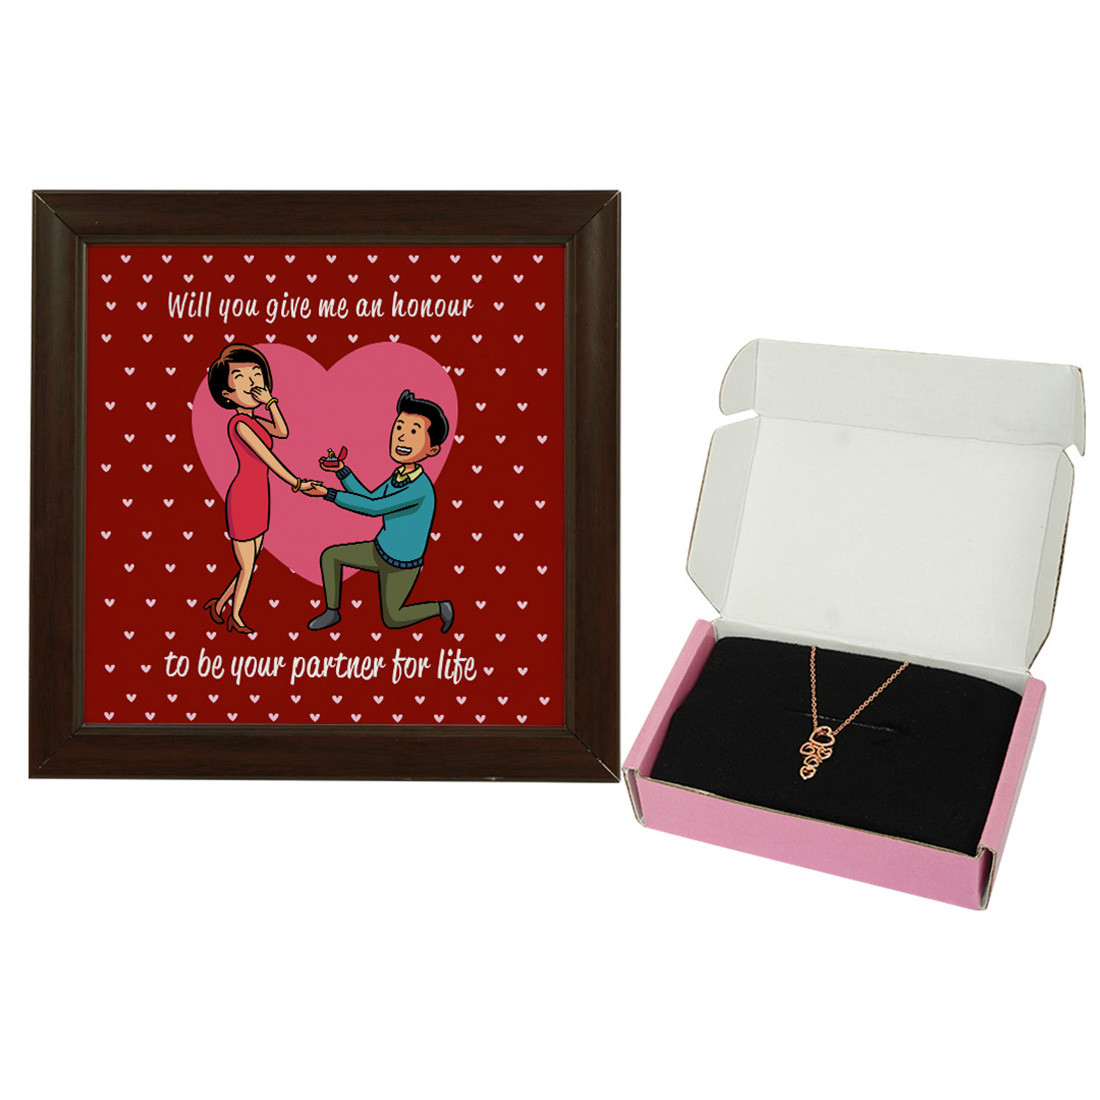 Top 10 Gift Ideas as Valentine Day Gifts for Girlfriend